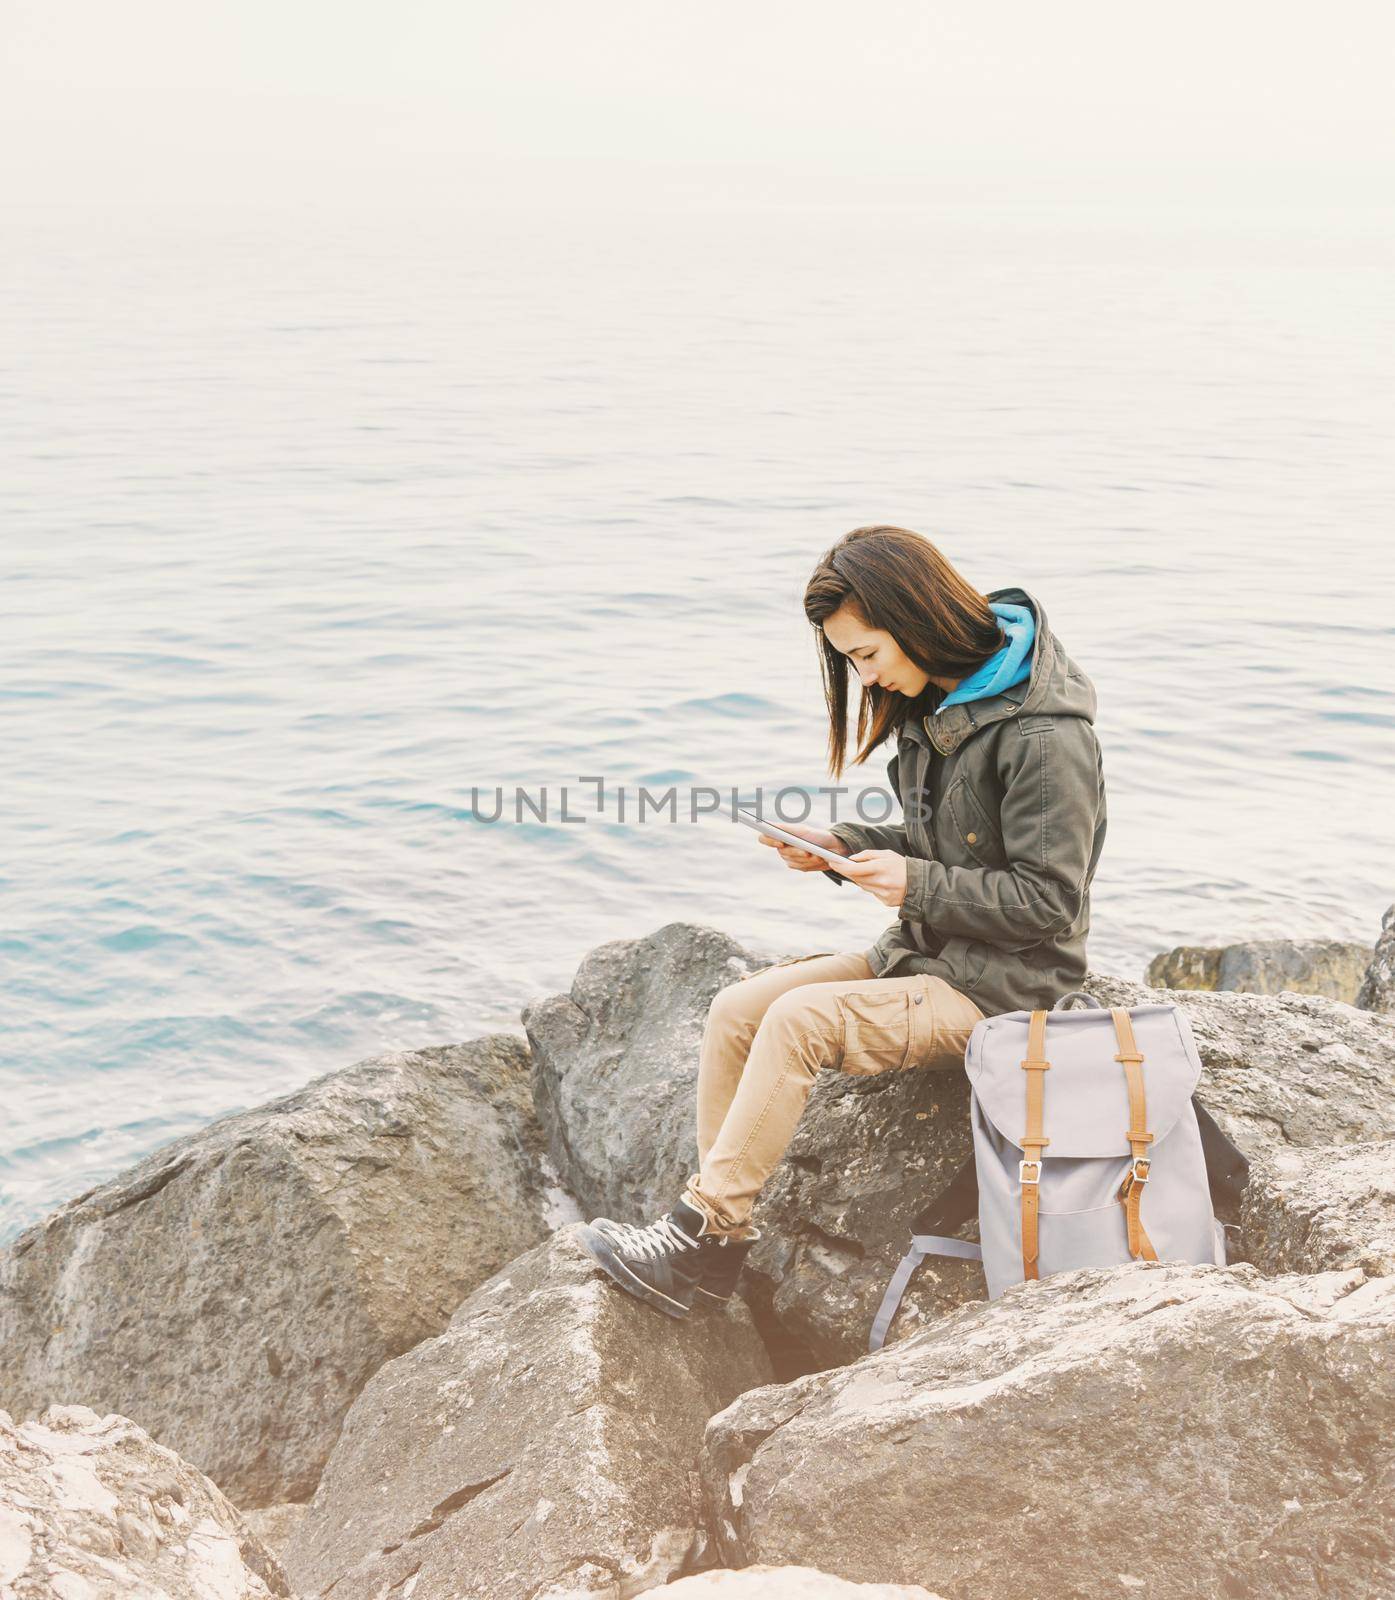 Freelancer and traveler young woman sitting on stone coast near the sea and working on digital tablet.